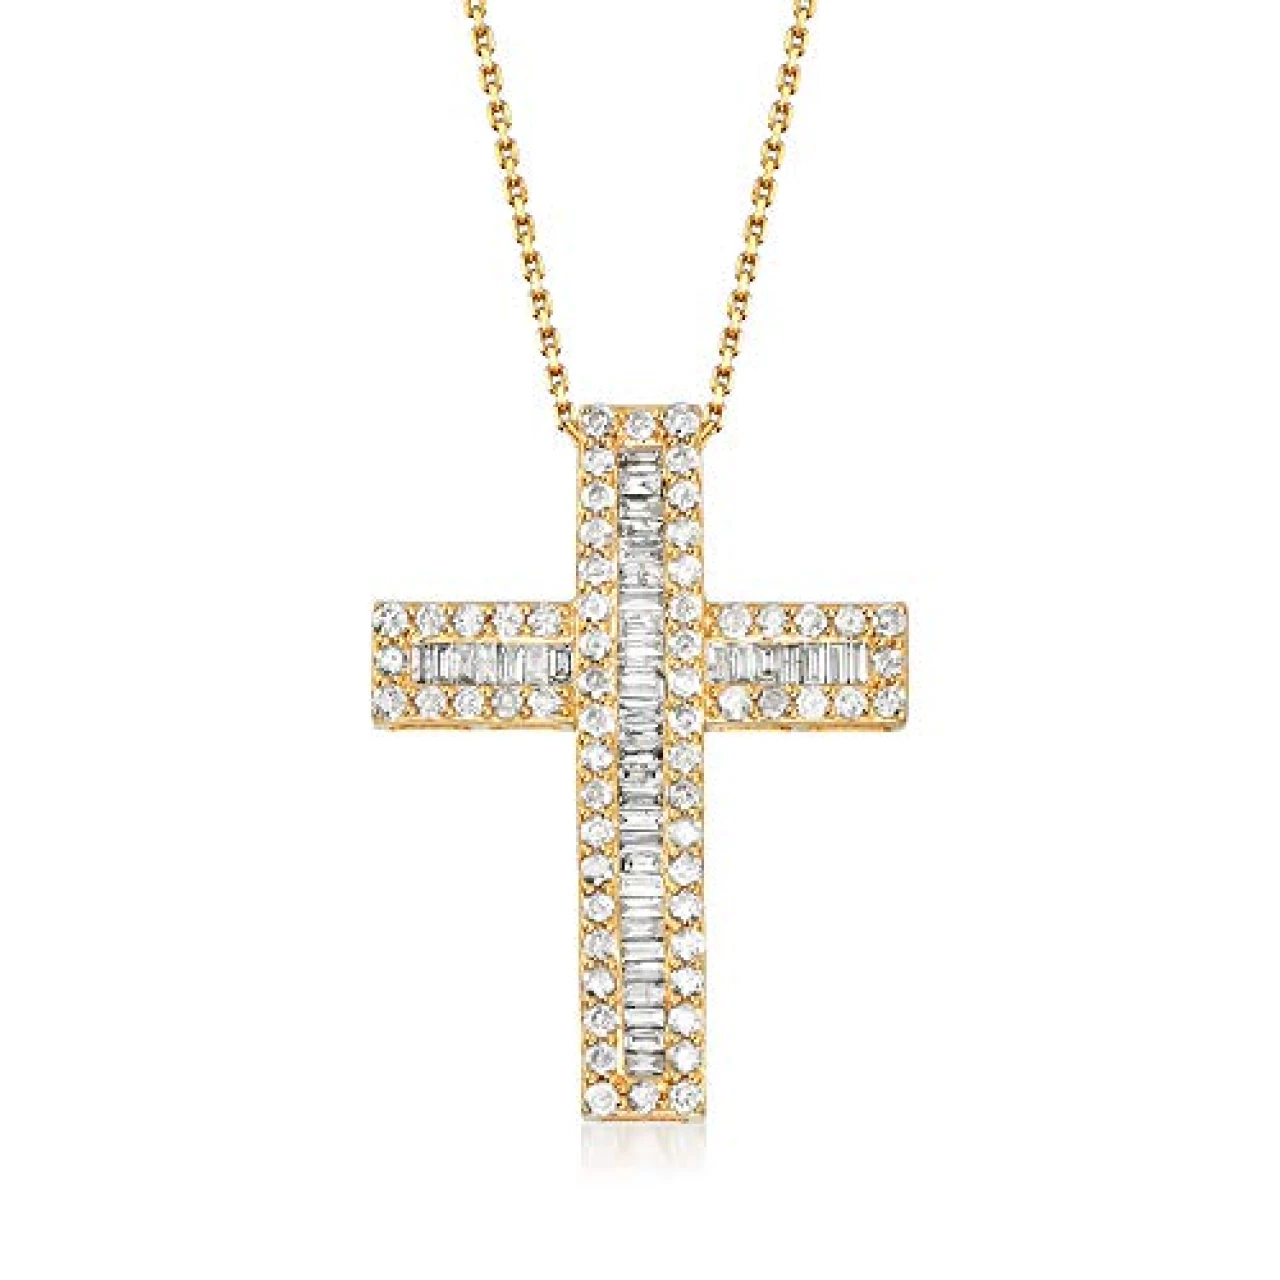 Ross-Simons 3.00 ct. t.w. Baguette and Round Diamond Cross Pendant Necklace in 18kt Gold Over Sterling. 18 inches